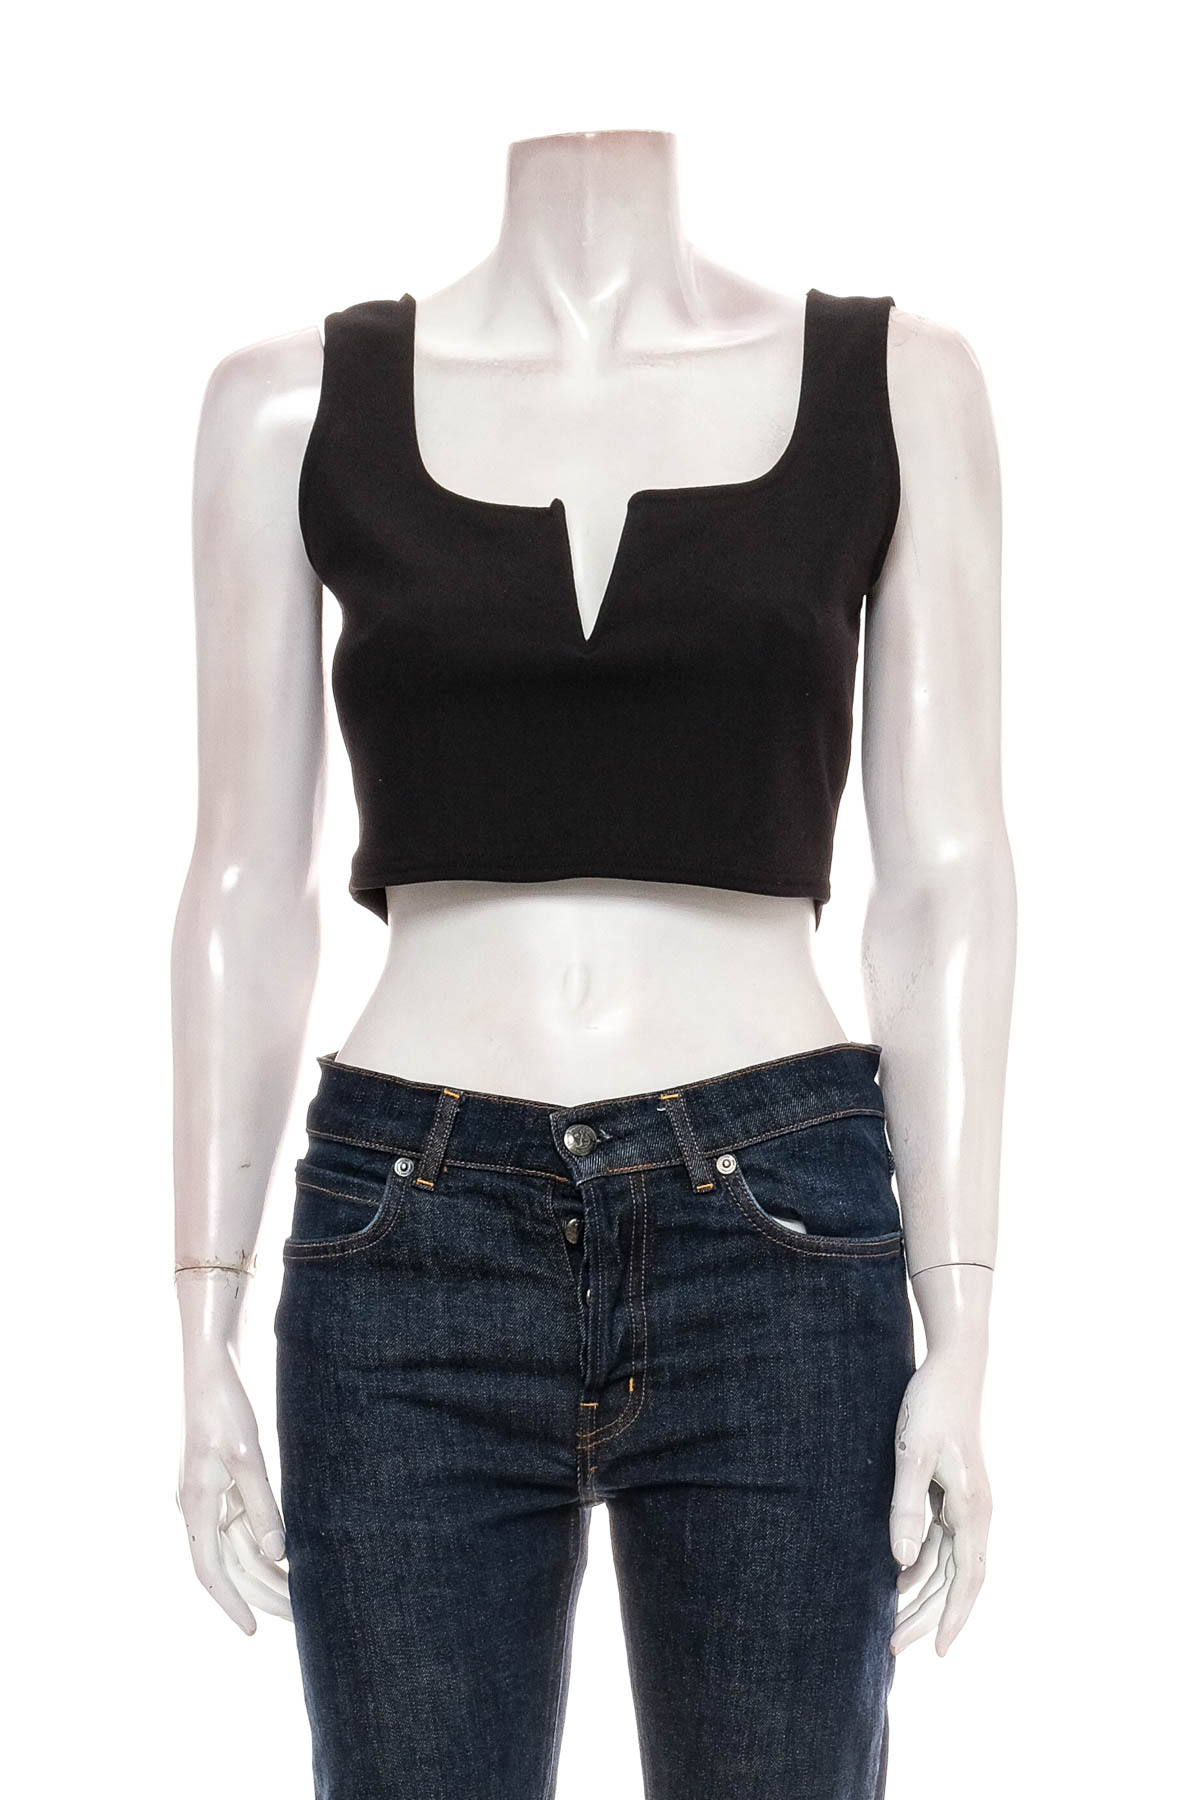 Women's top - NLY ONE - 0